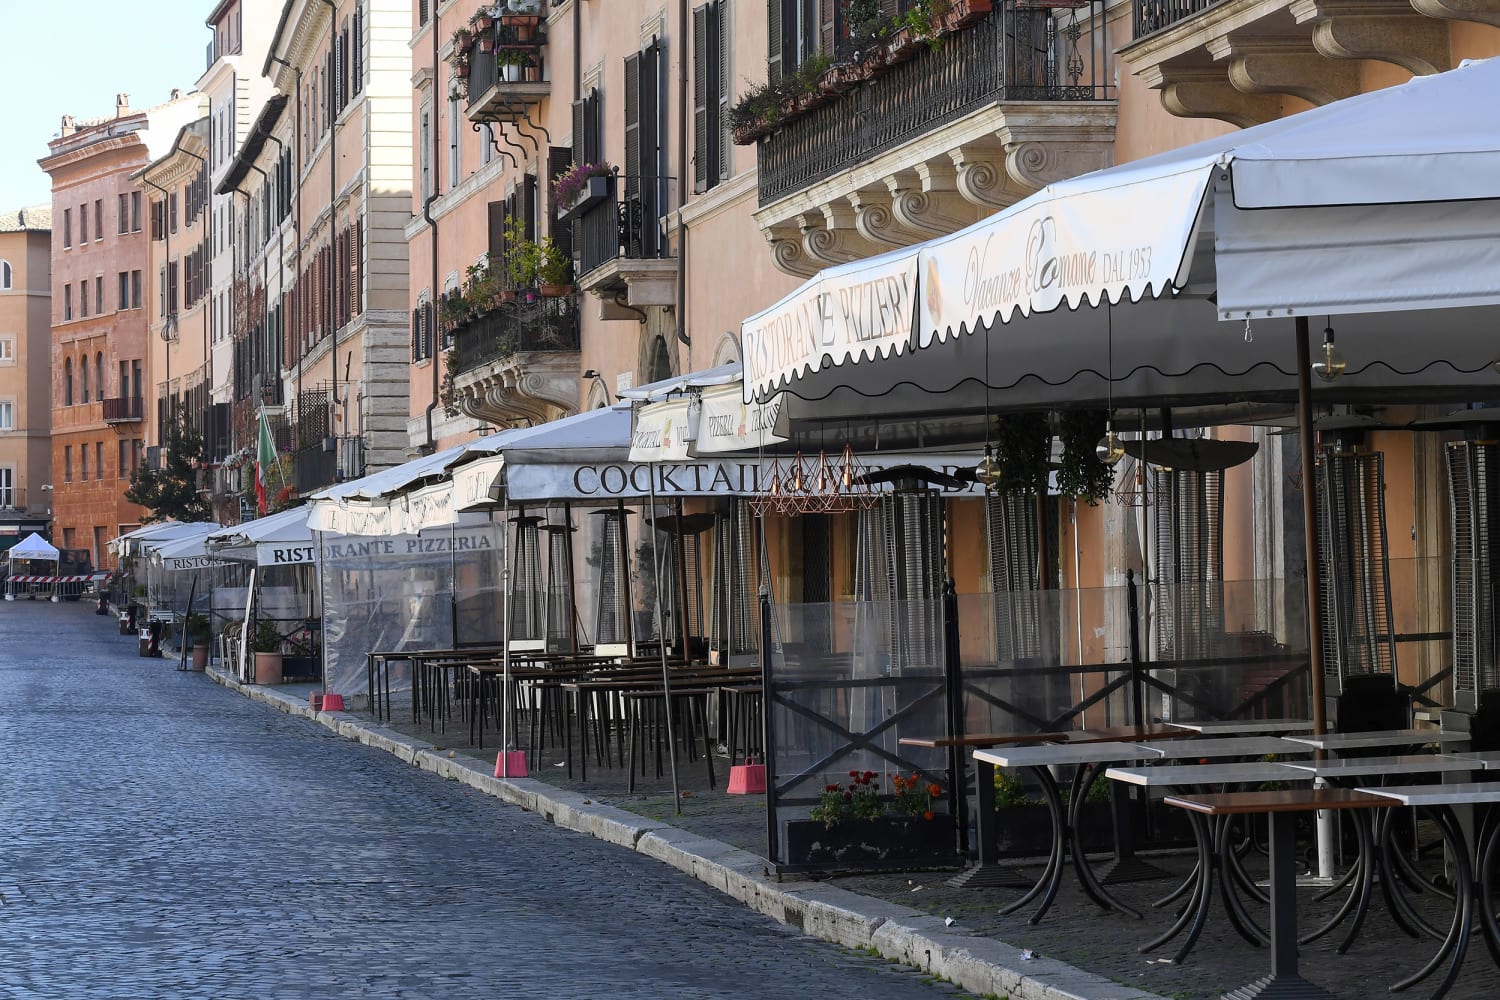 Italy appears to be a Ghost Town after Government enacts stricter Lockdown measures